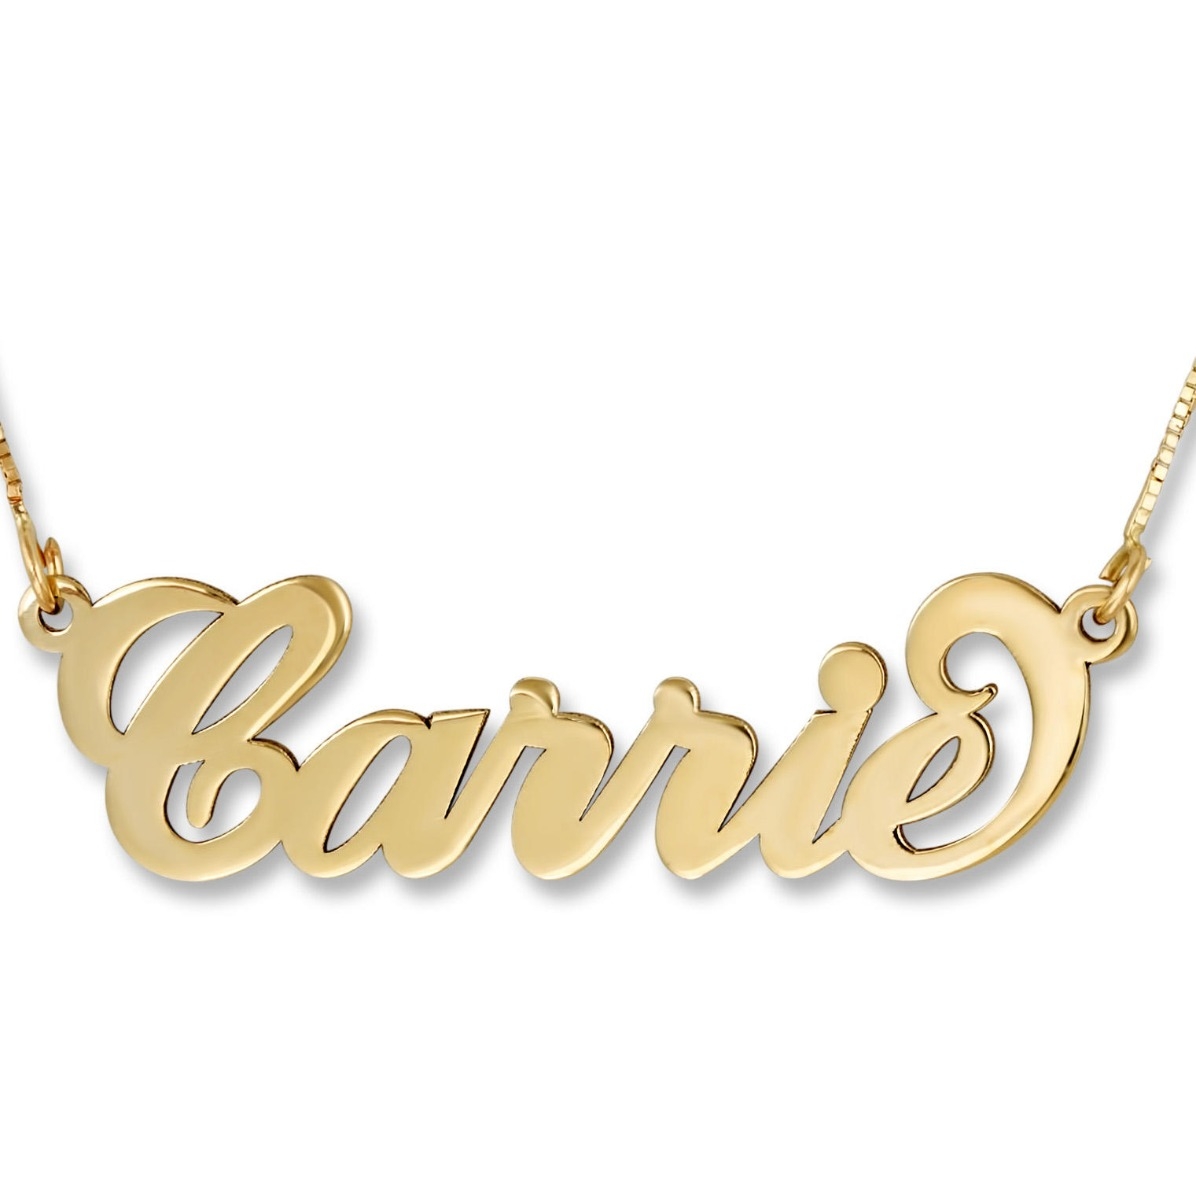 14K Gold Carrie Style Name Necklace - 1